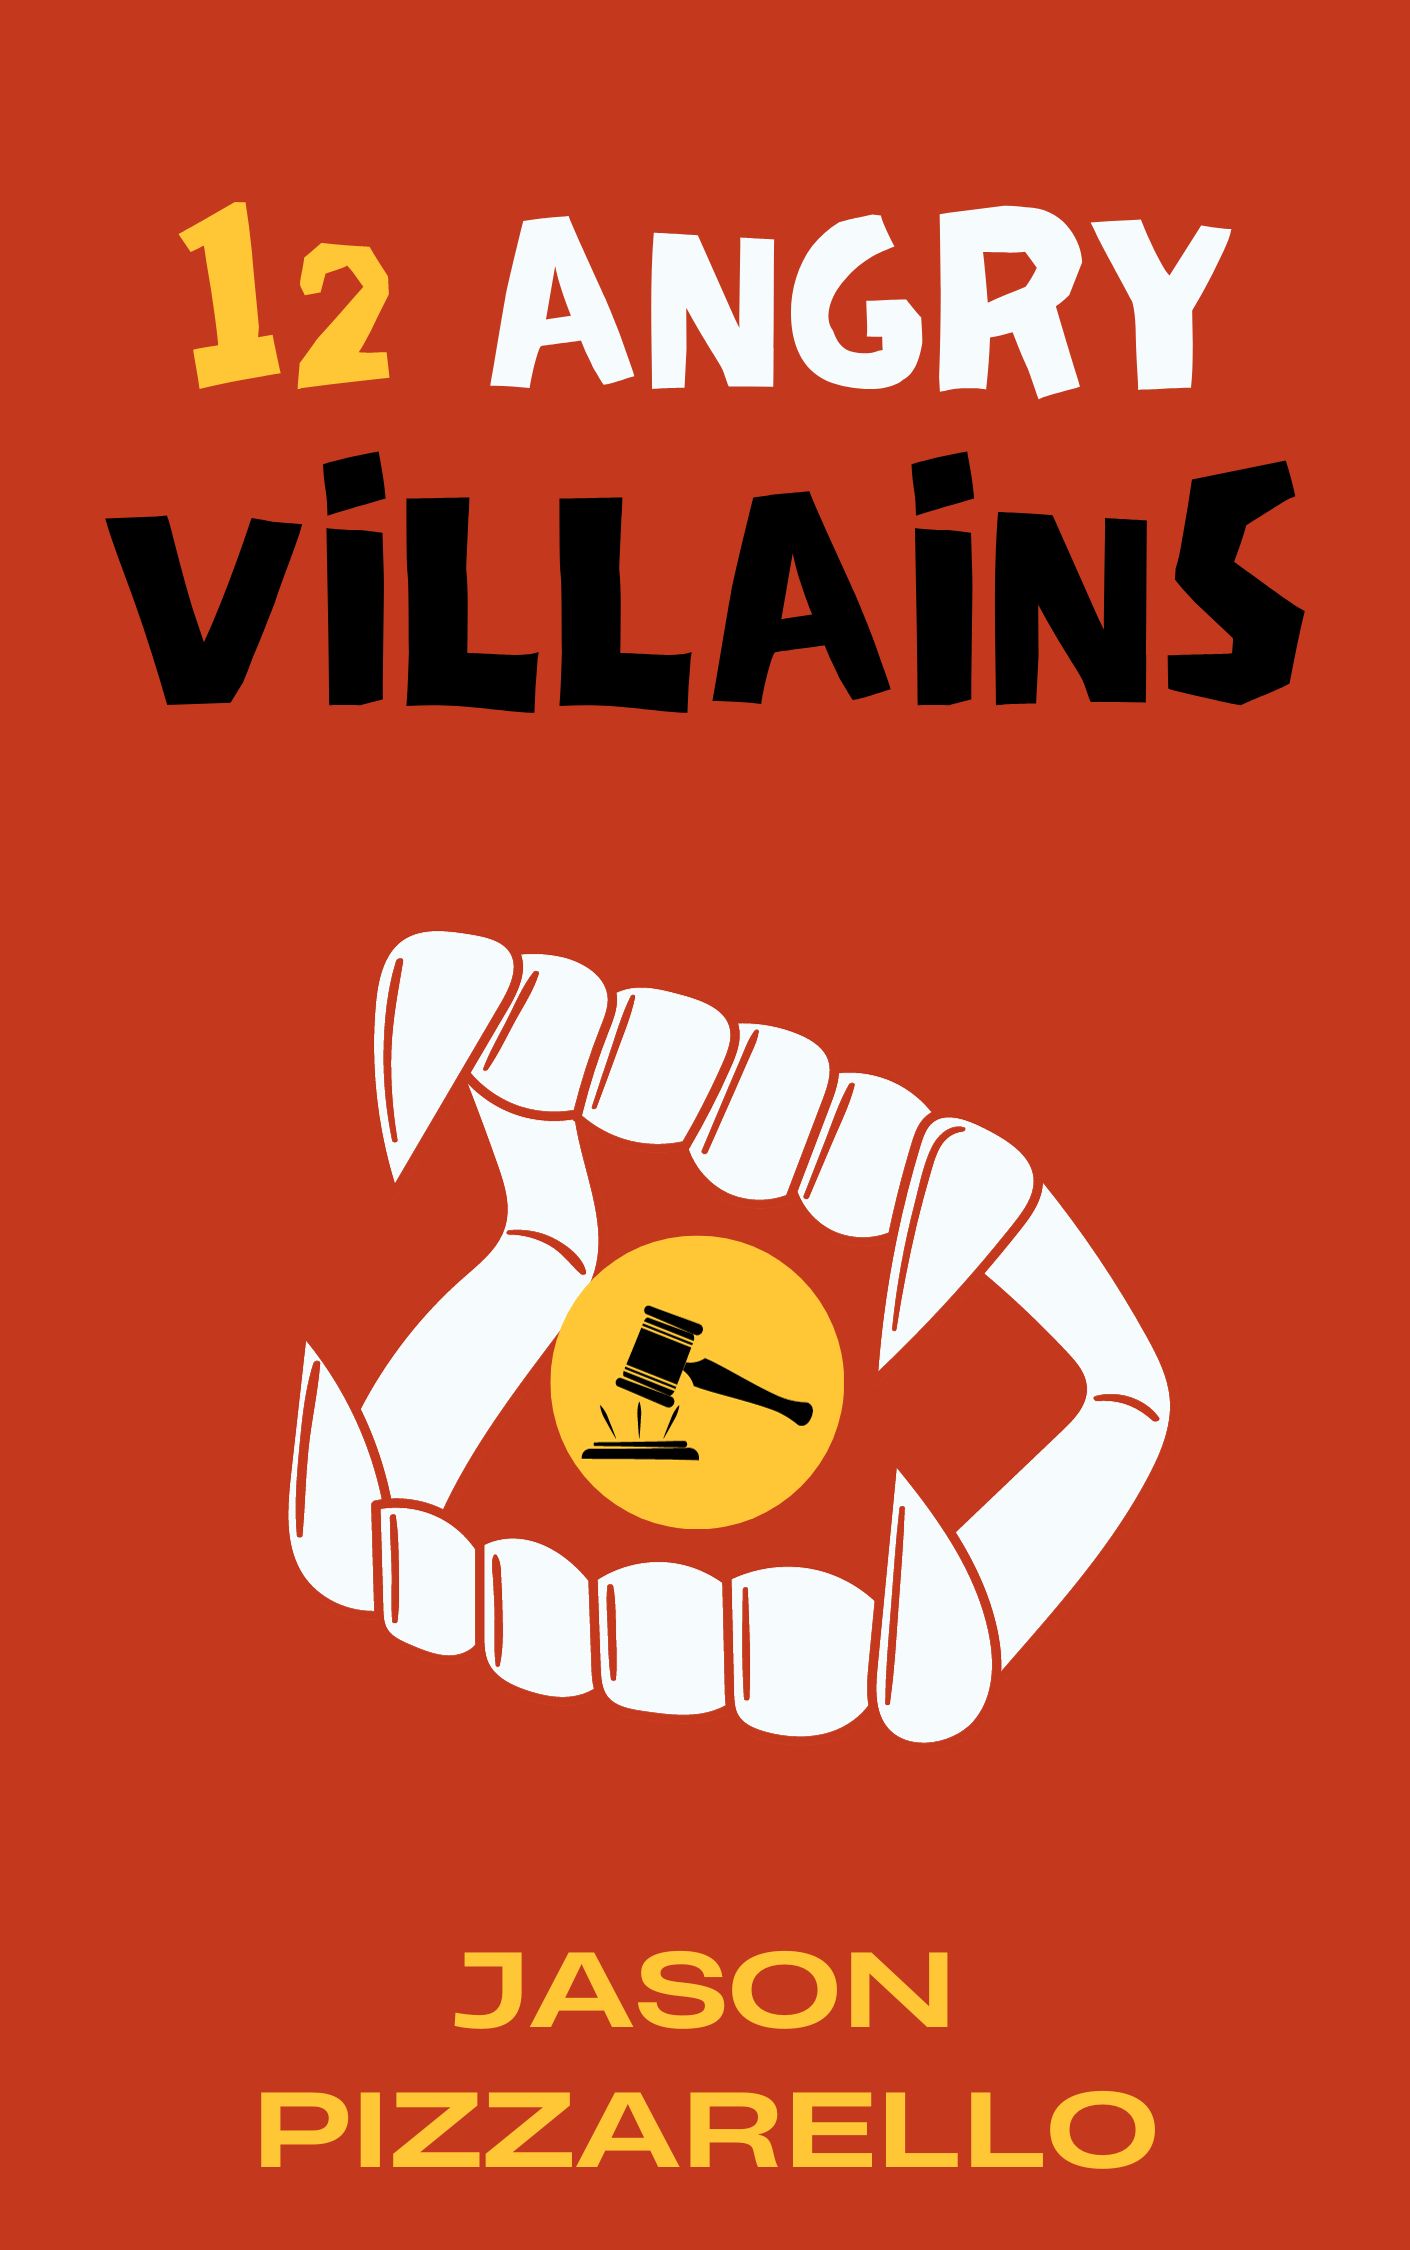 12 Angry Villians one-act play comedy